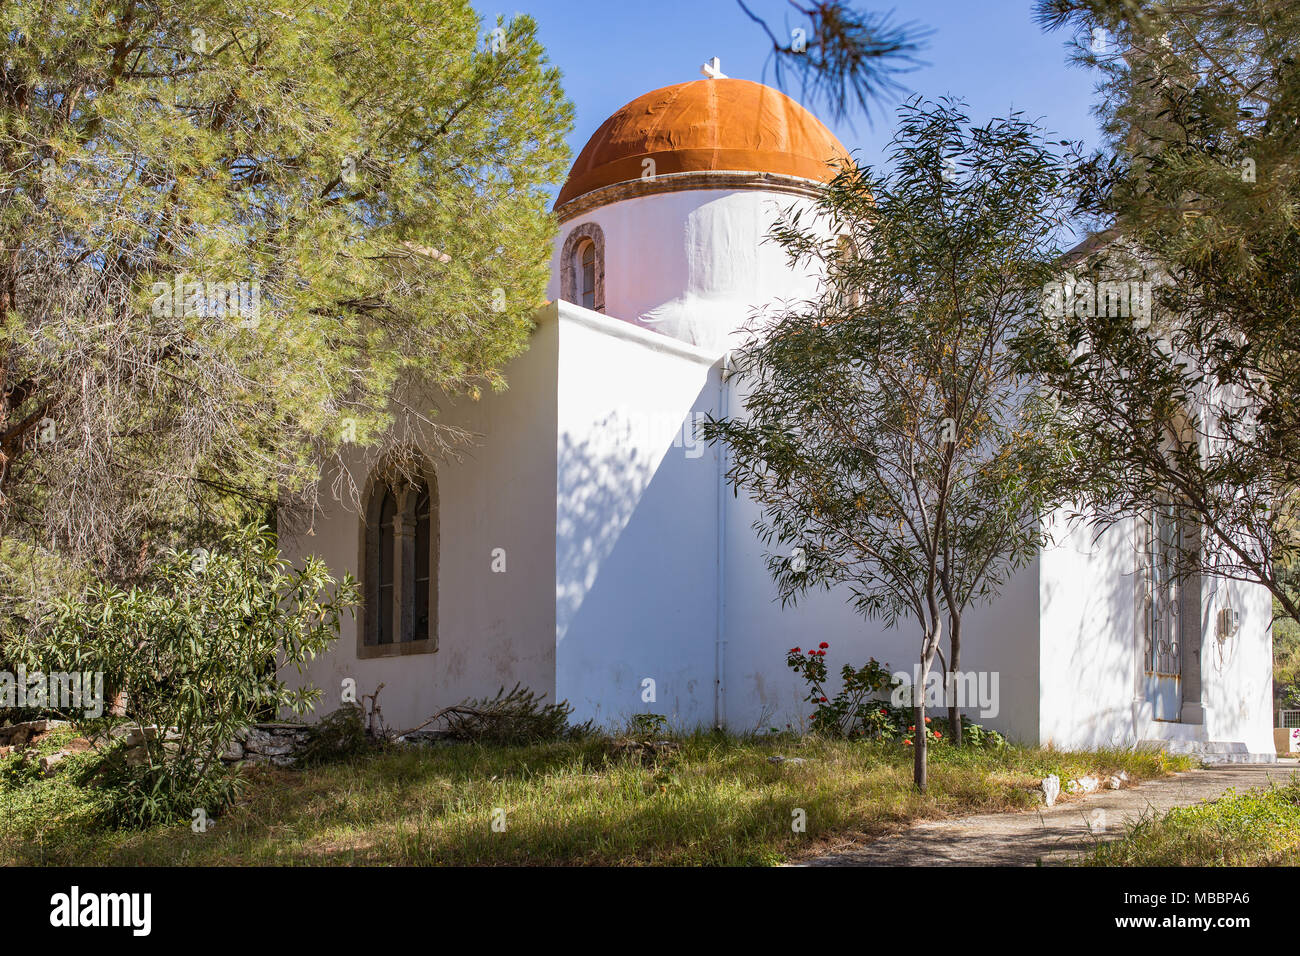 Page 8 - Crete Church High Resolution Stock Photography and Images - Alamy